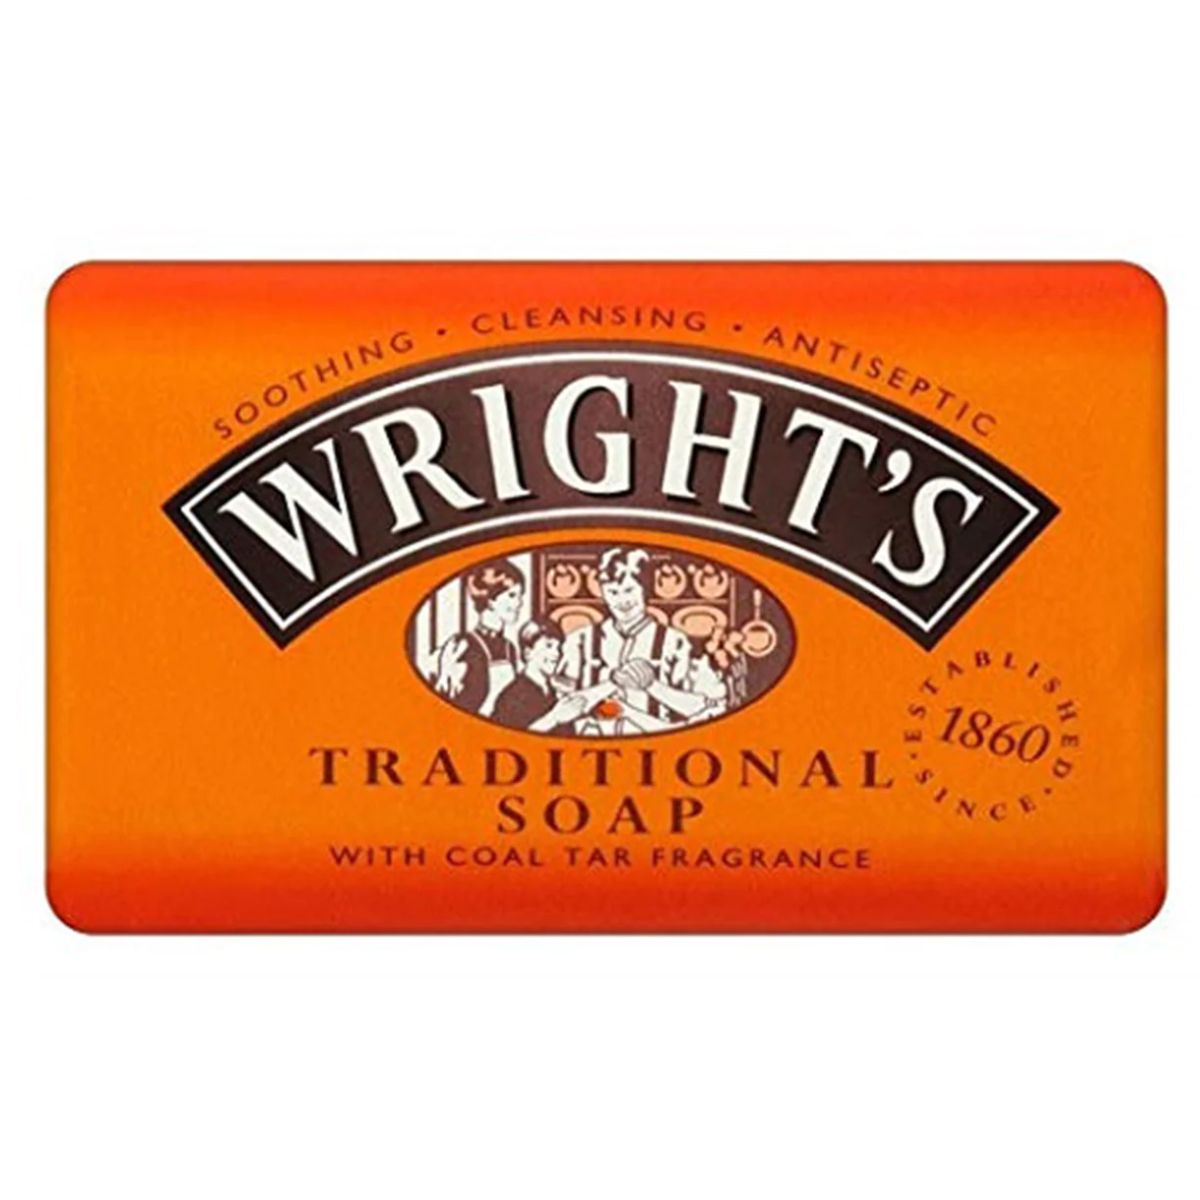 A pack of Wrights - 4 Bars Traditional Soap with coal tar fragrance, marketed as soothing, cleansing, and antiseptic.